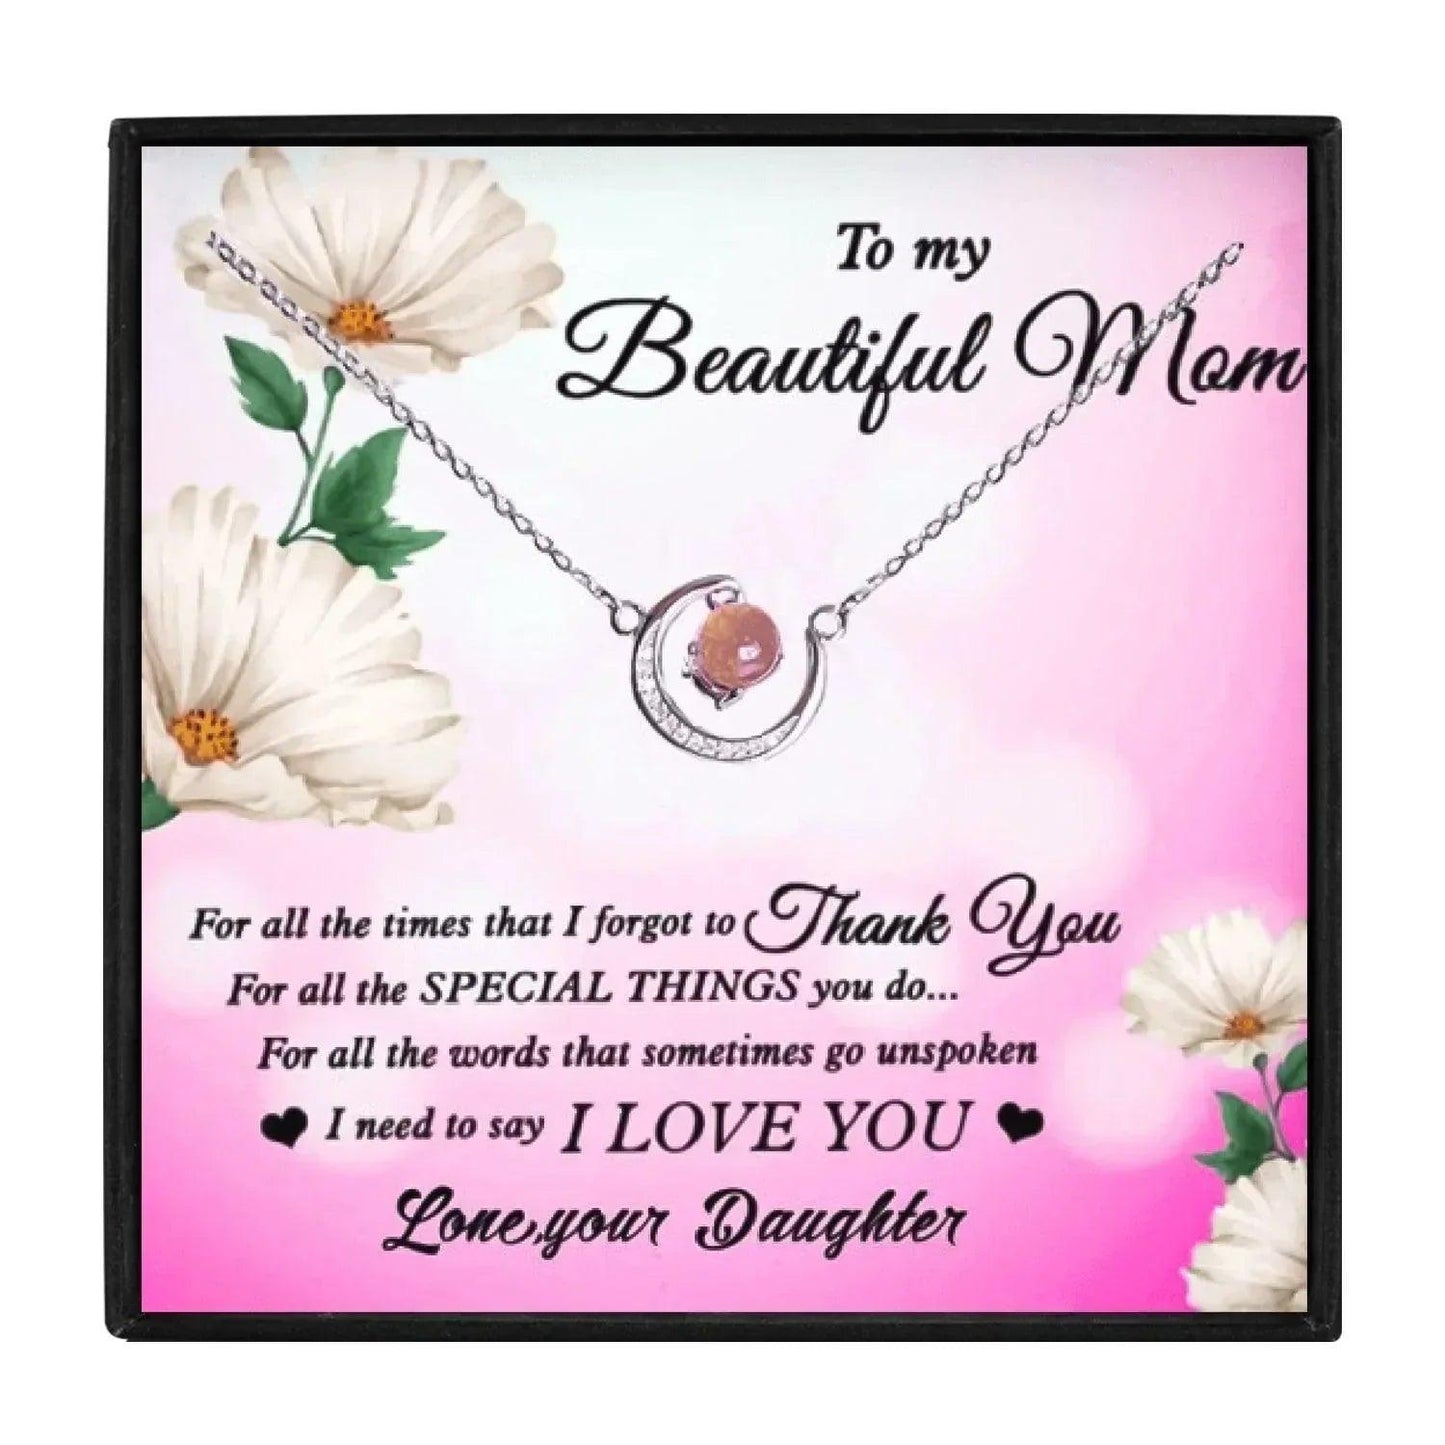 To My Beautiful Mom Necklace Gift Set from Daughter in 2023 | To My Beautiful Mom Necklace Gift Set from Daughter - undefined | Happy Birthday Mom Necklace Gift ideas, Mom Necklace, Mom Necklace Gift, to my mom necklaces | From Hunny Life | hunnylife.com